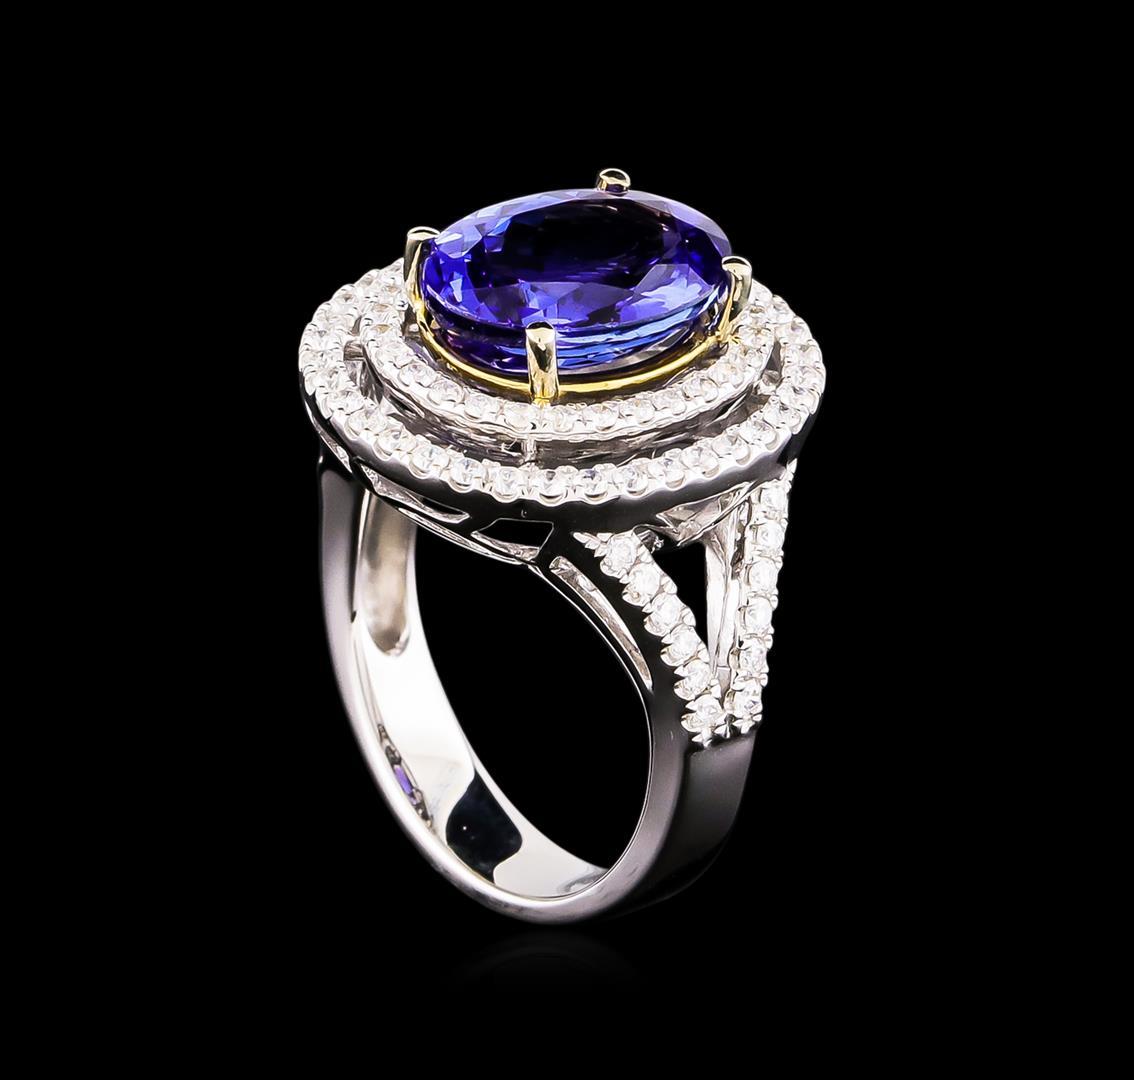 14KT Two-Tone 4.50 ctw Tanzanite and Diamond Ring